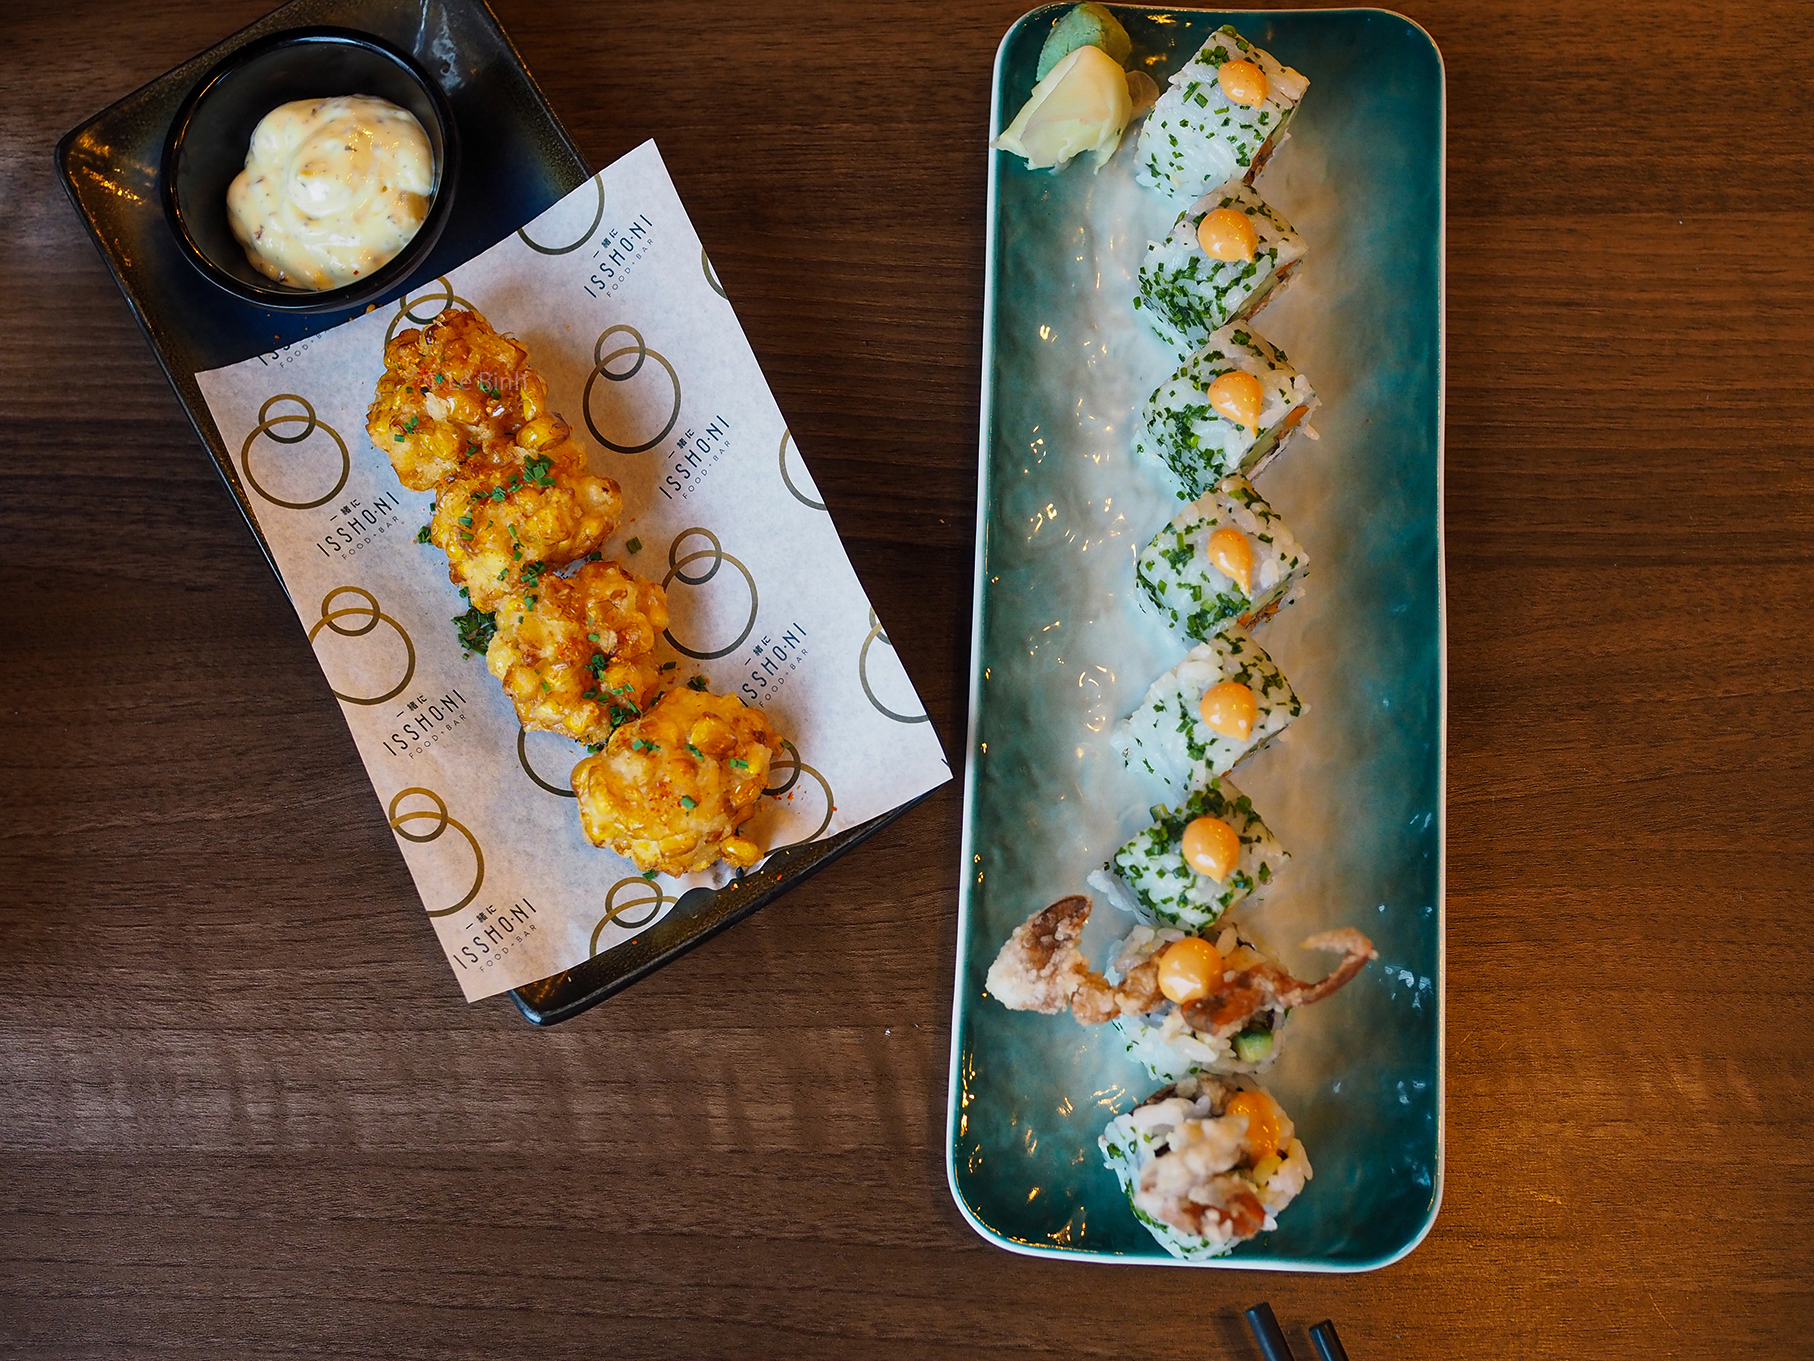 Sweetcorn kakiage and spider roll